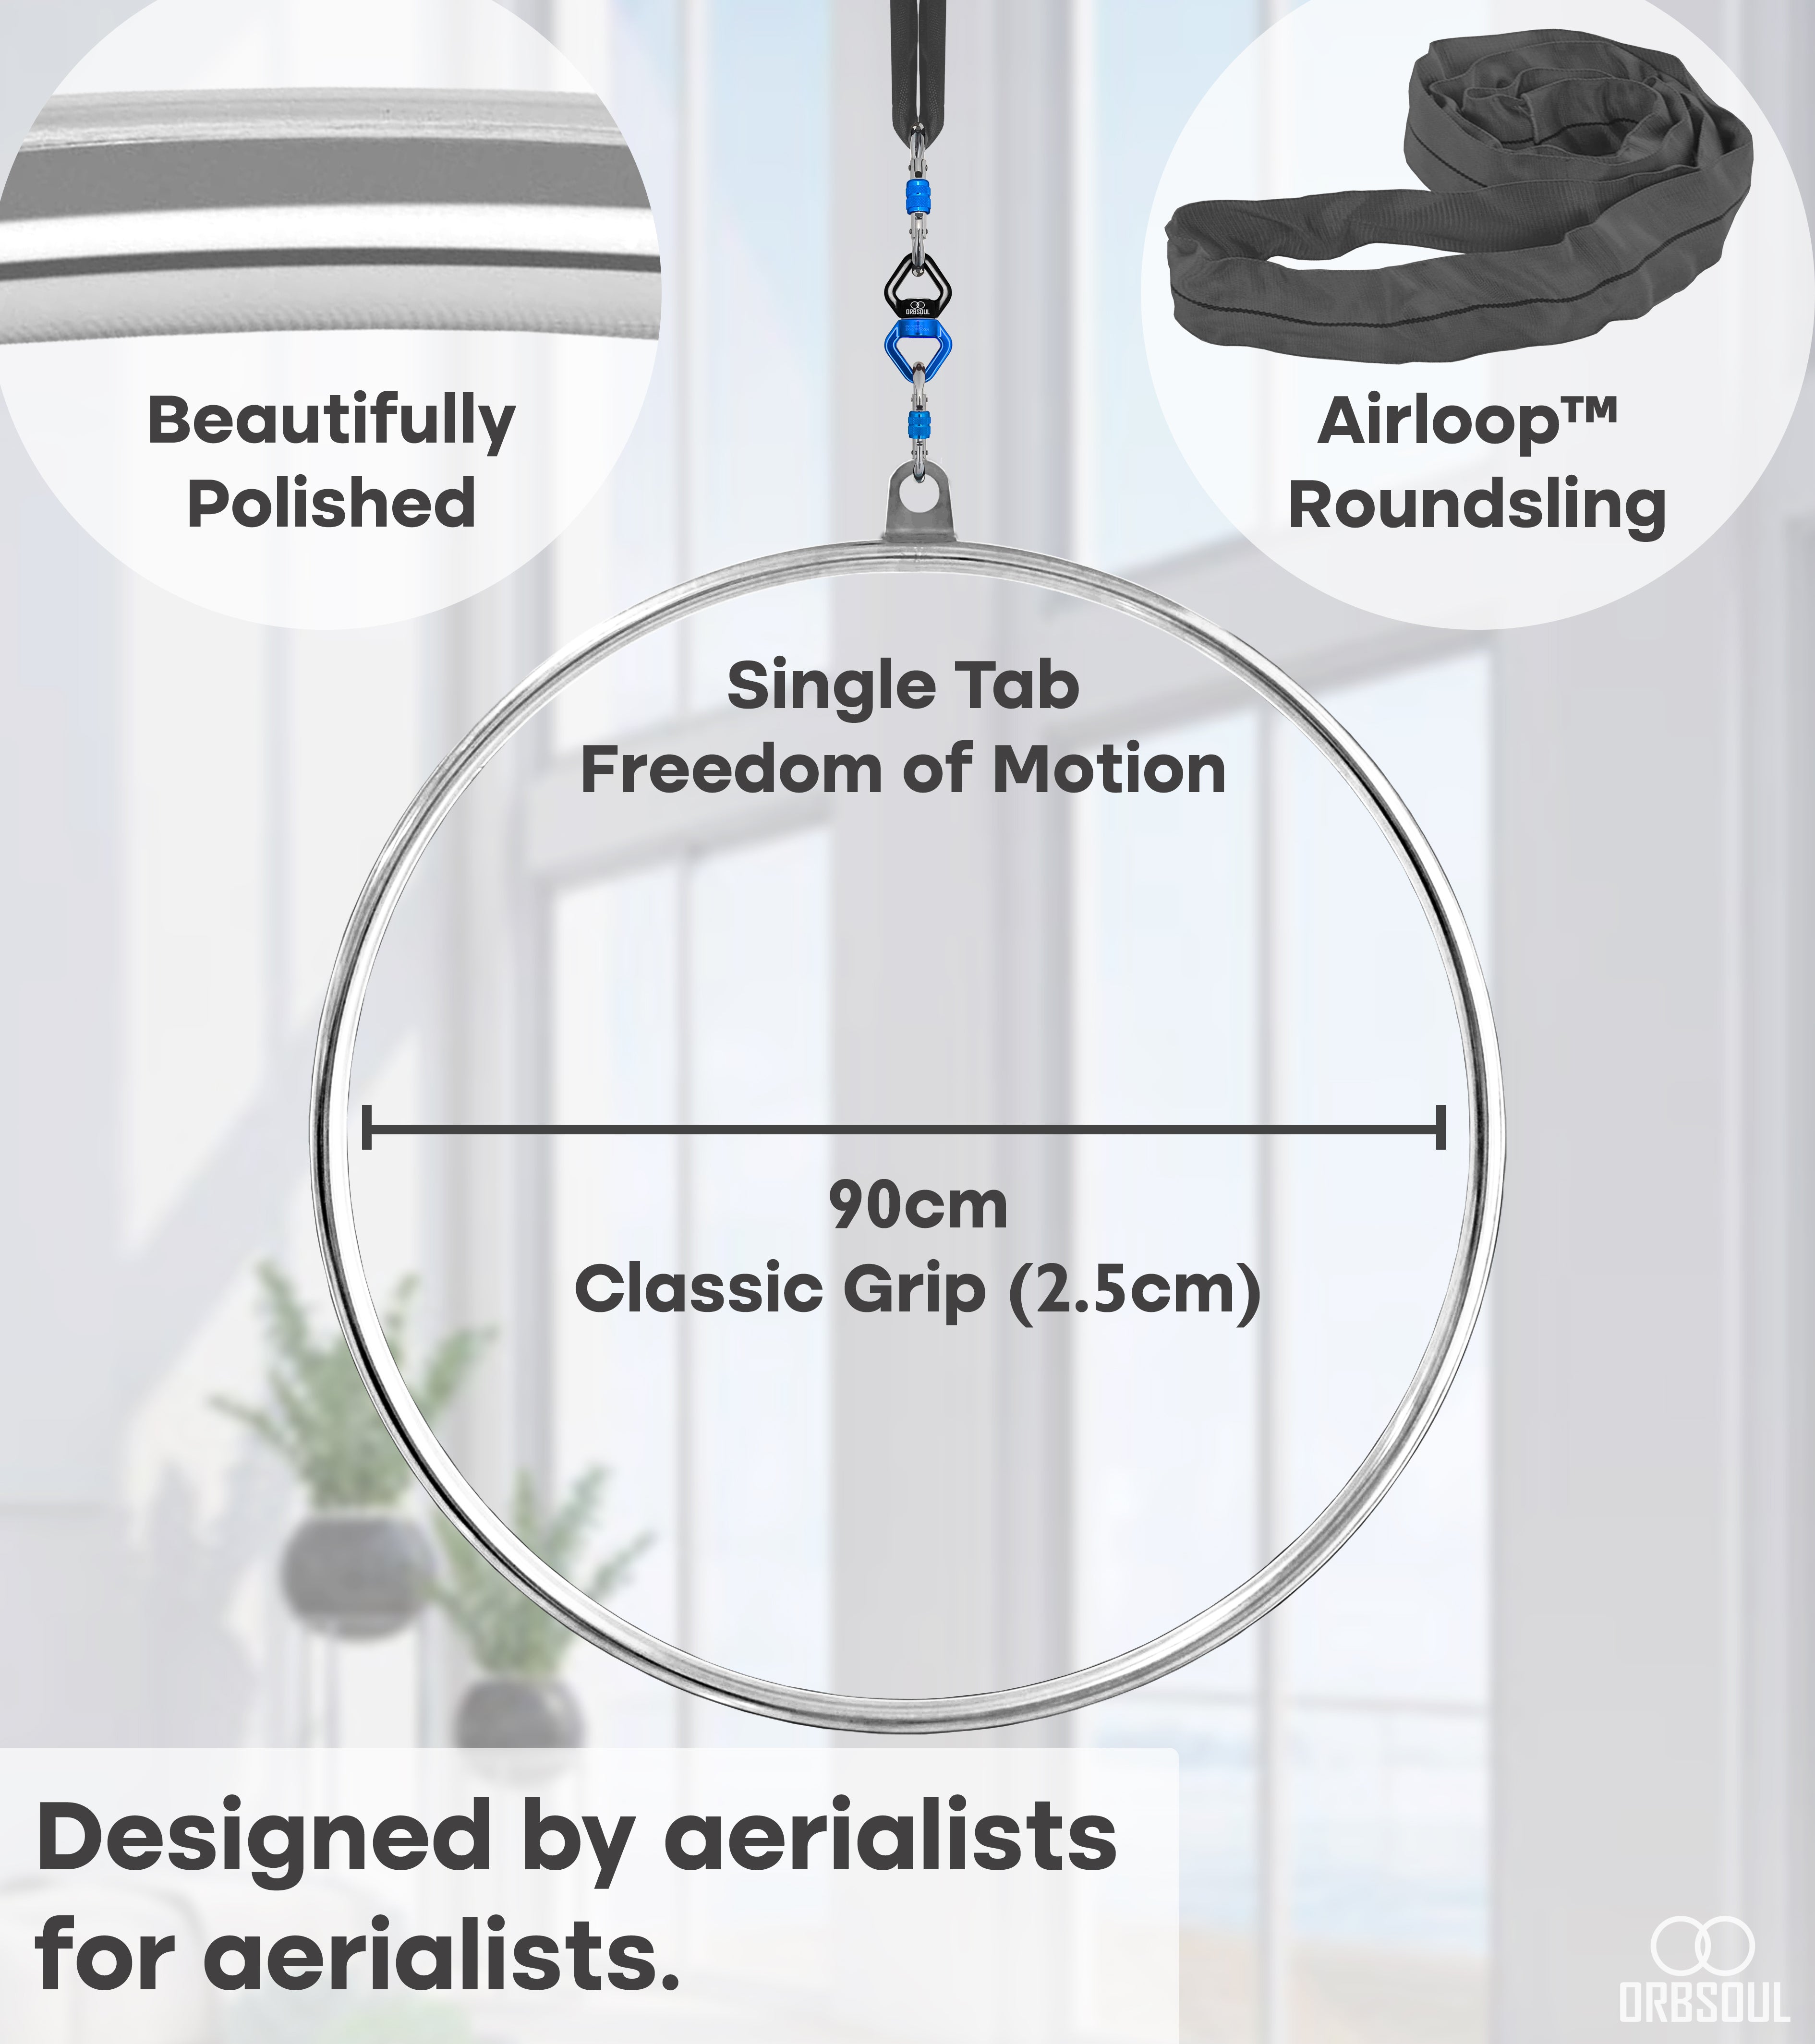 Orbsoul Eclipse aerial hoop. Includes Airloop roundsling. Beautifully polished hoop. Single tab freedom of motion. Designed for aerialists for aerialists.